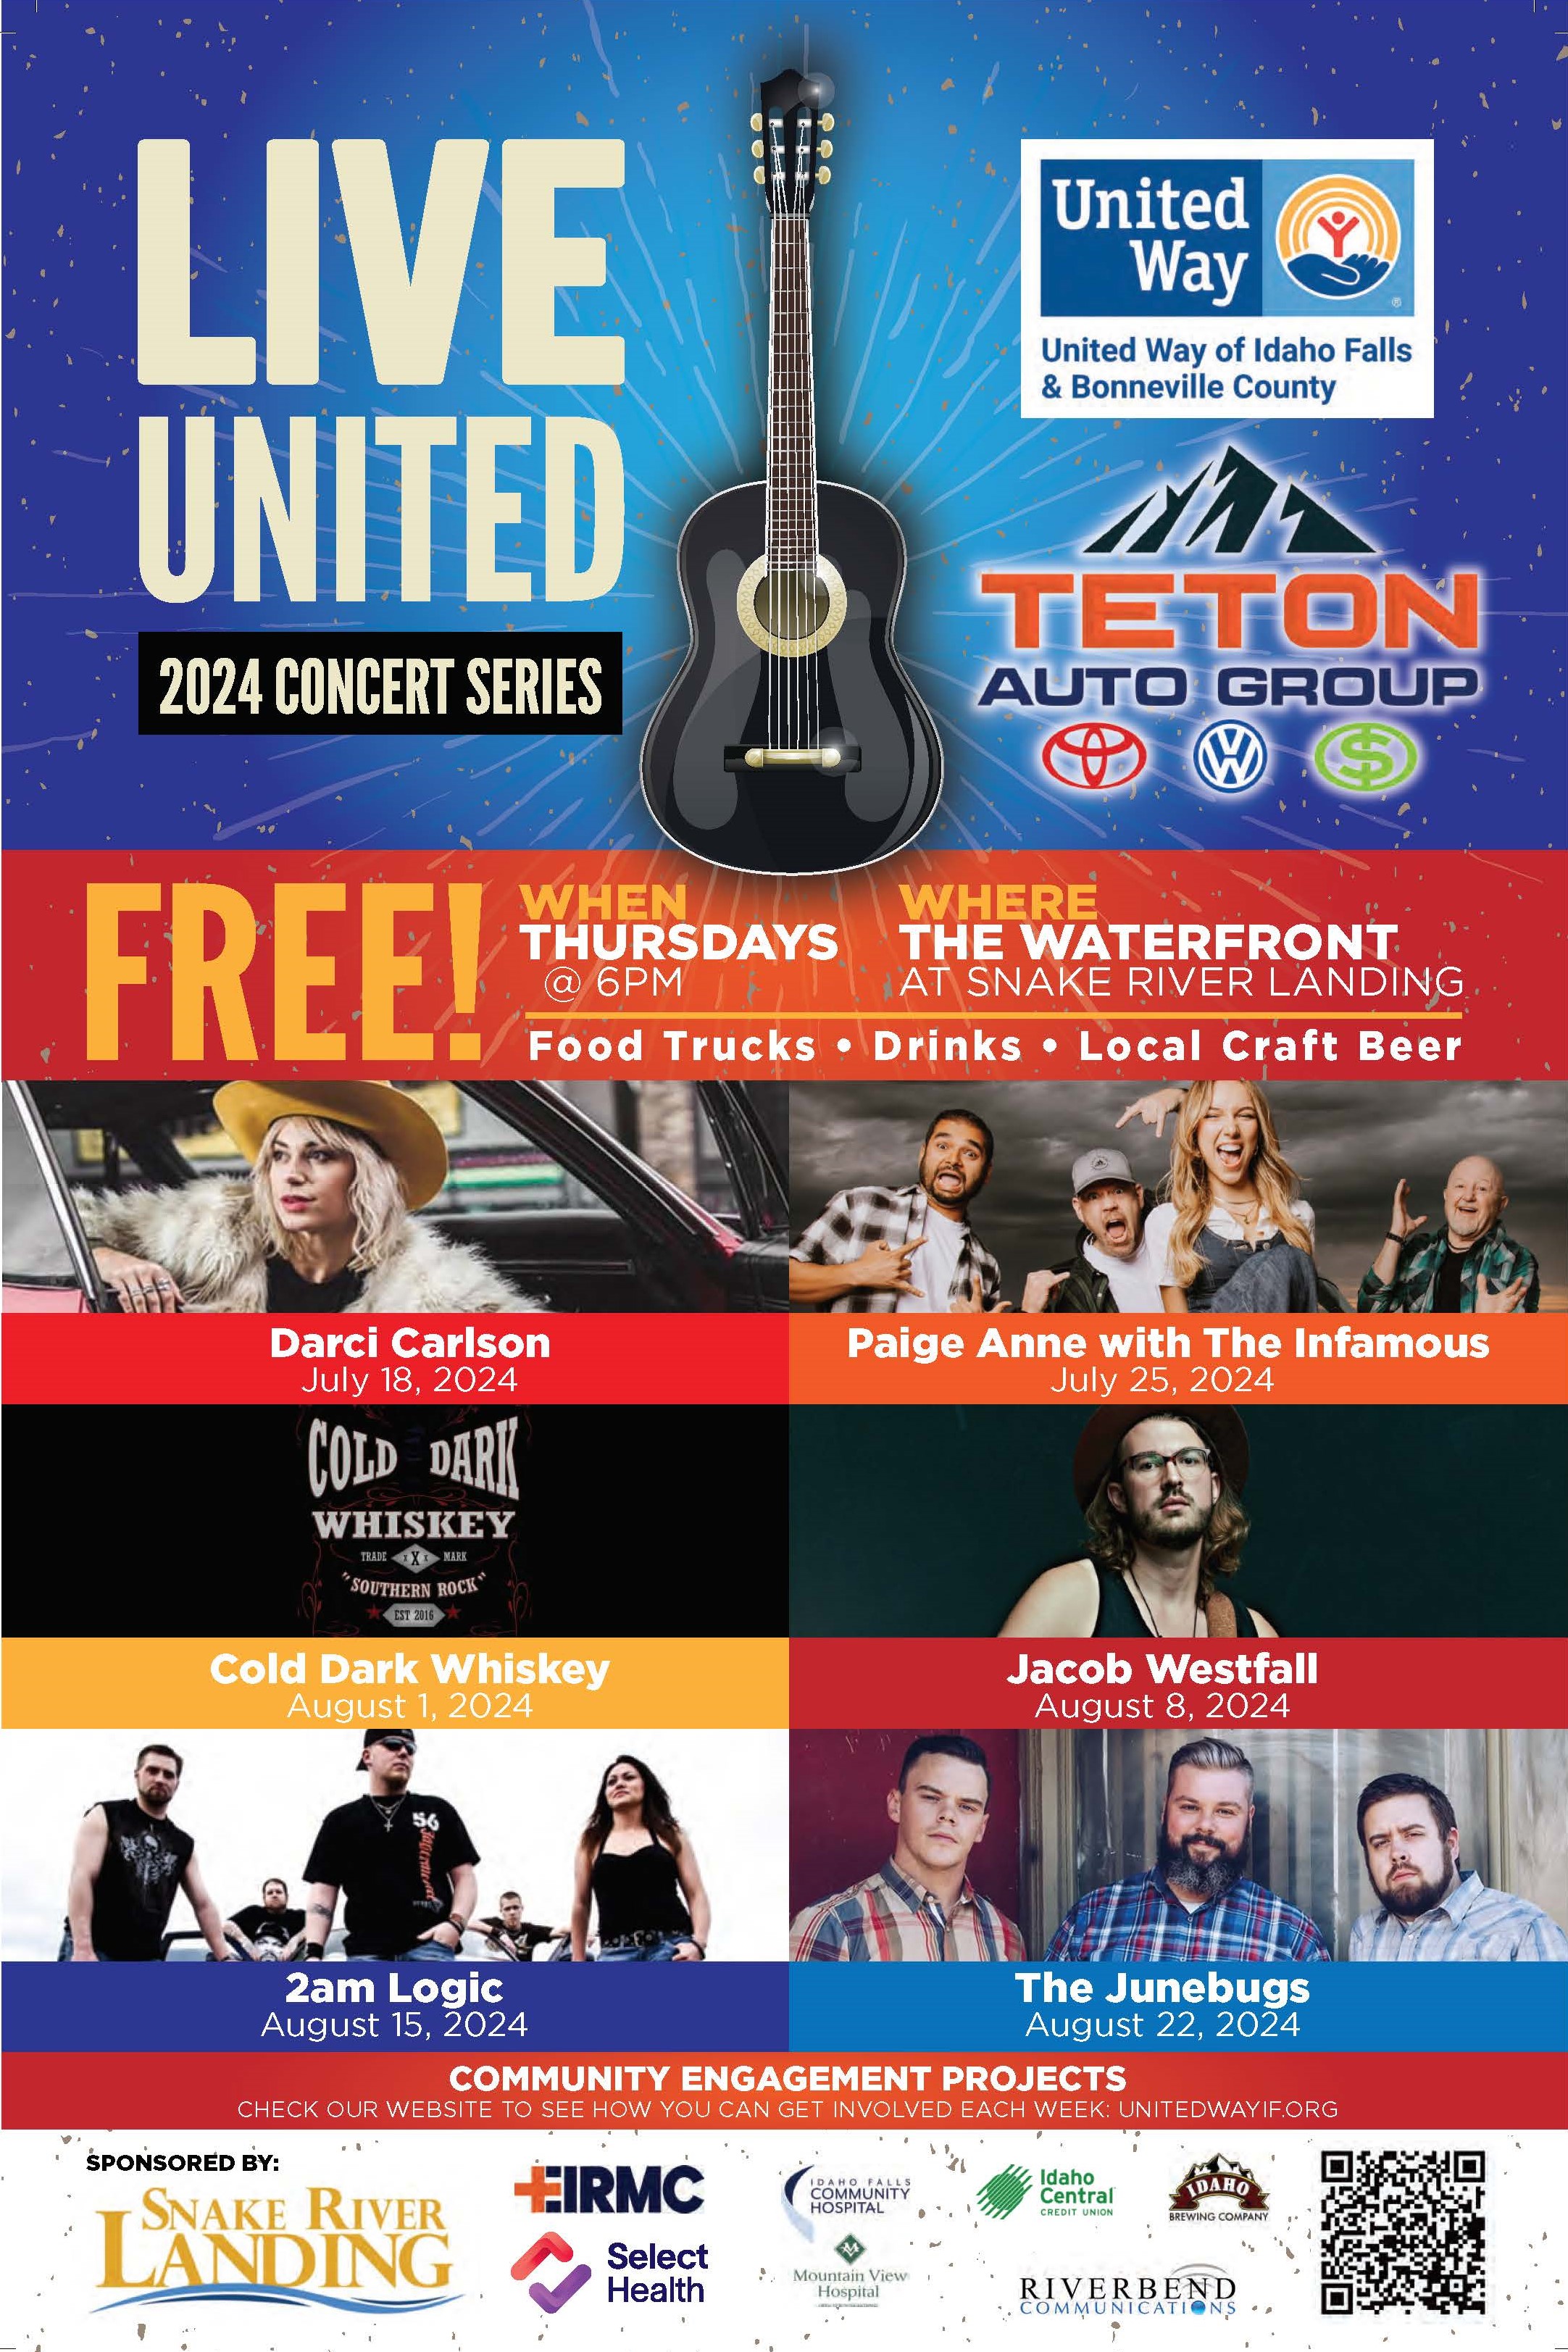 Live United Concert Series poster